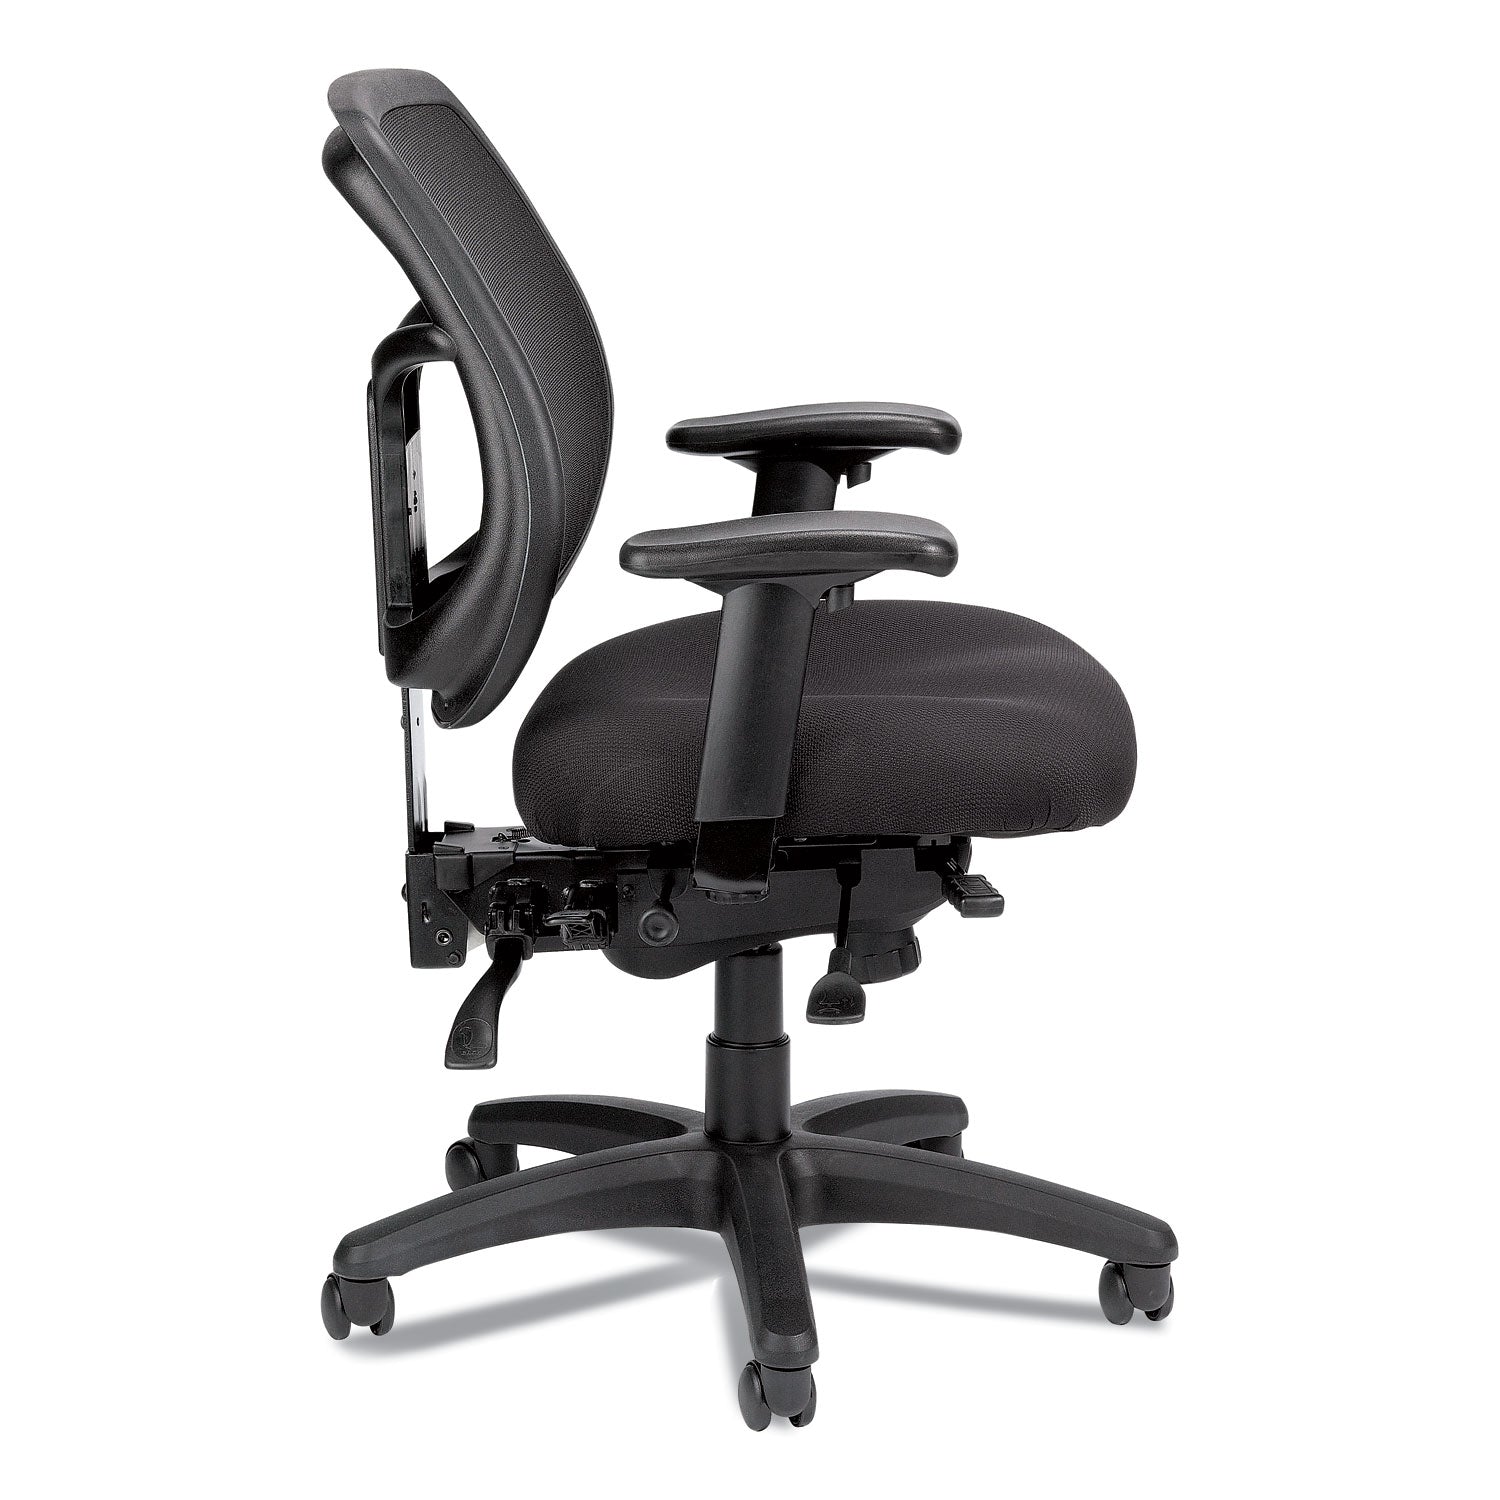 apollo-multi-function-mesh-task-chair-supports-up-to-250-lb-189-to-224-seat-height-silver-seat-back-black-base_eutmft945sl - 4